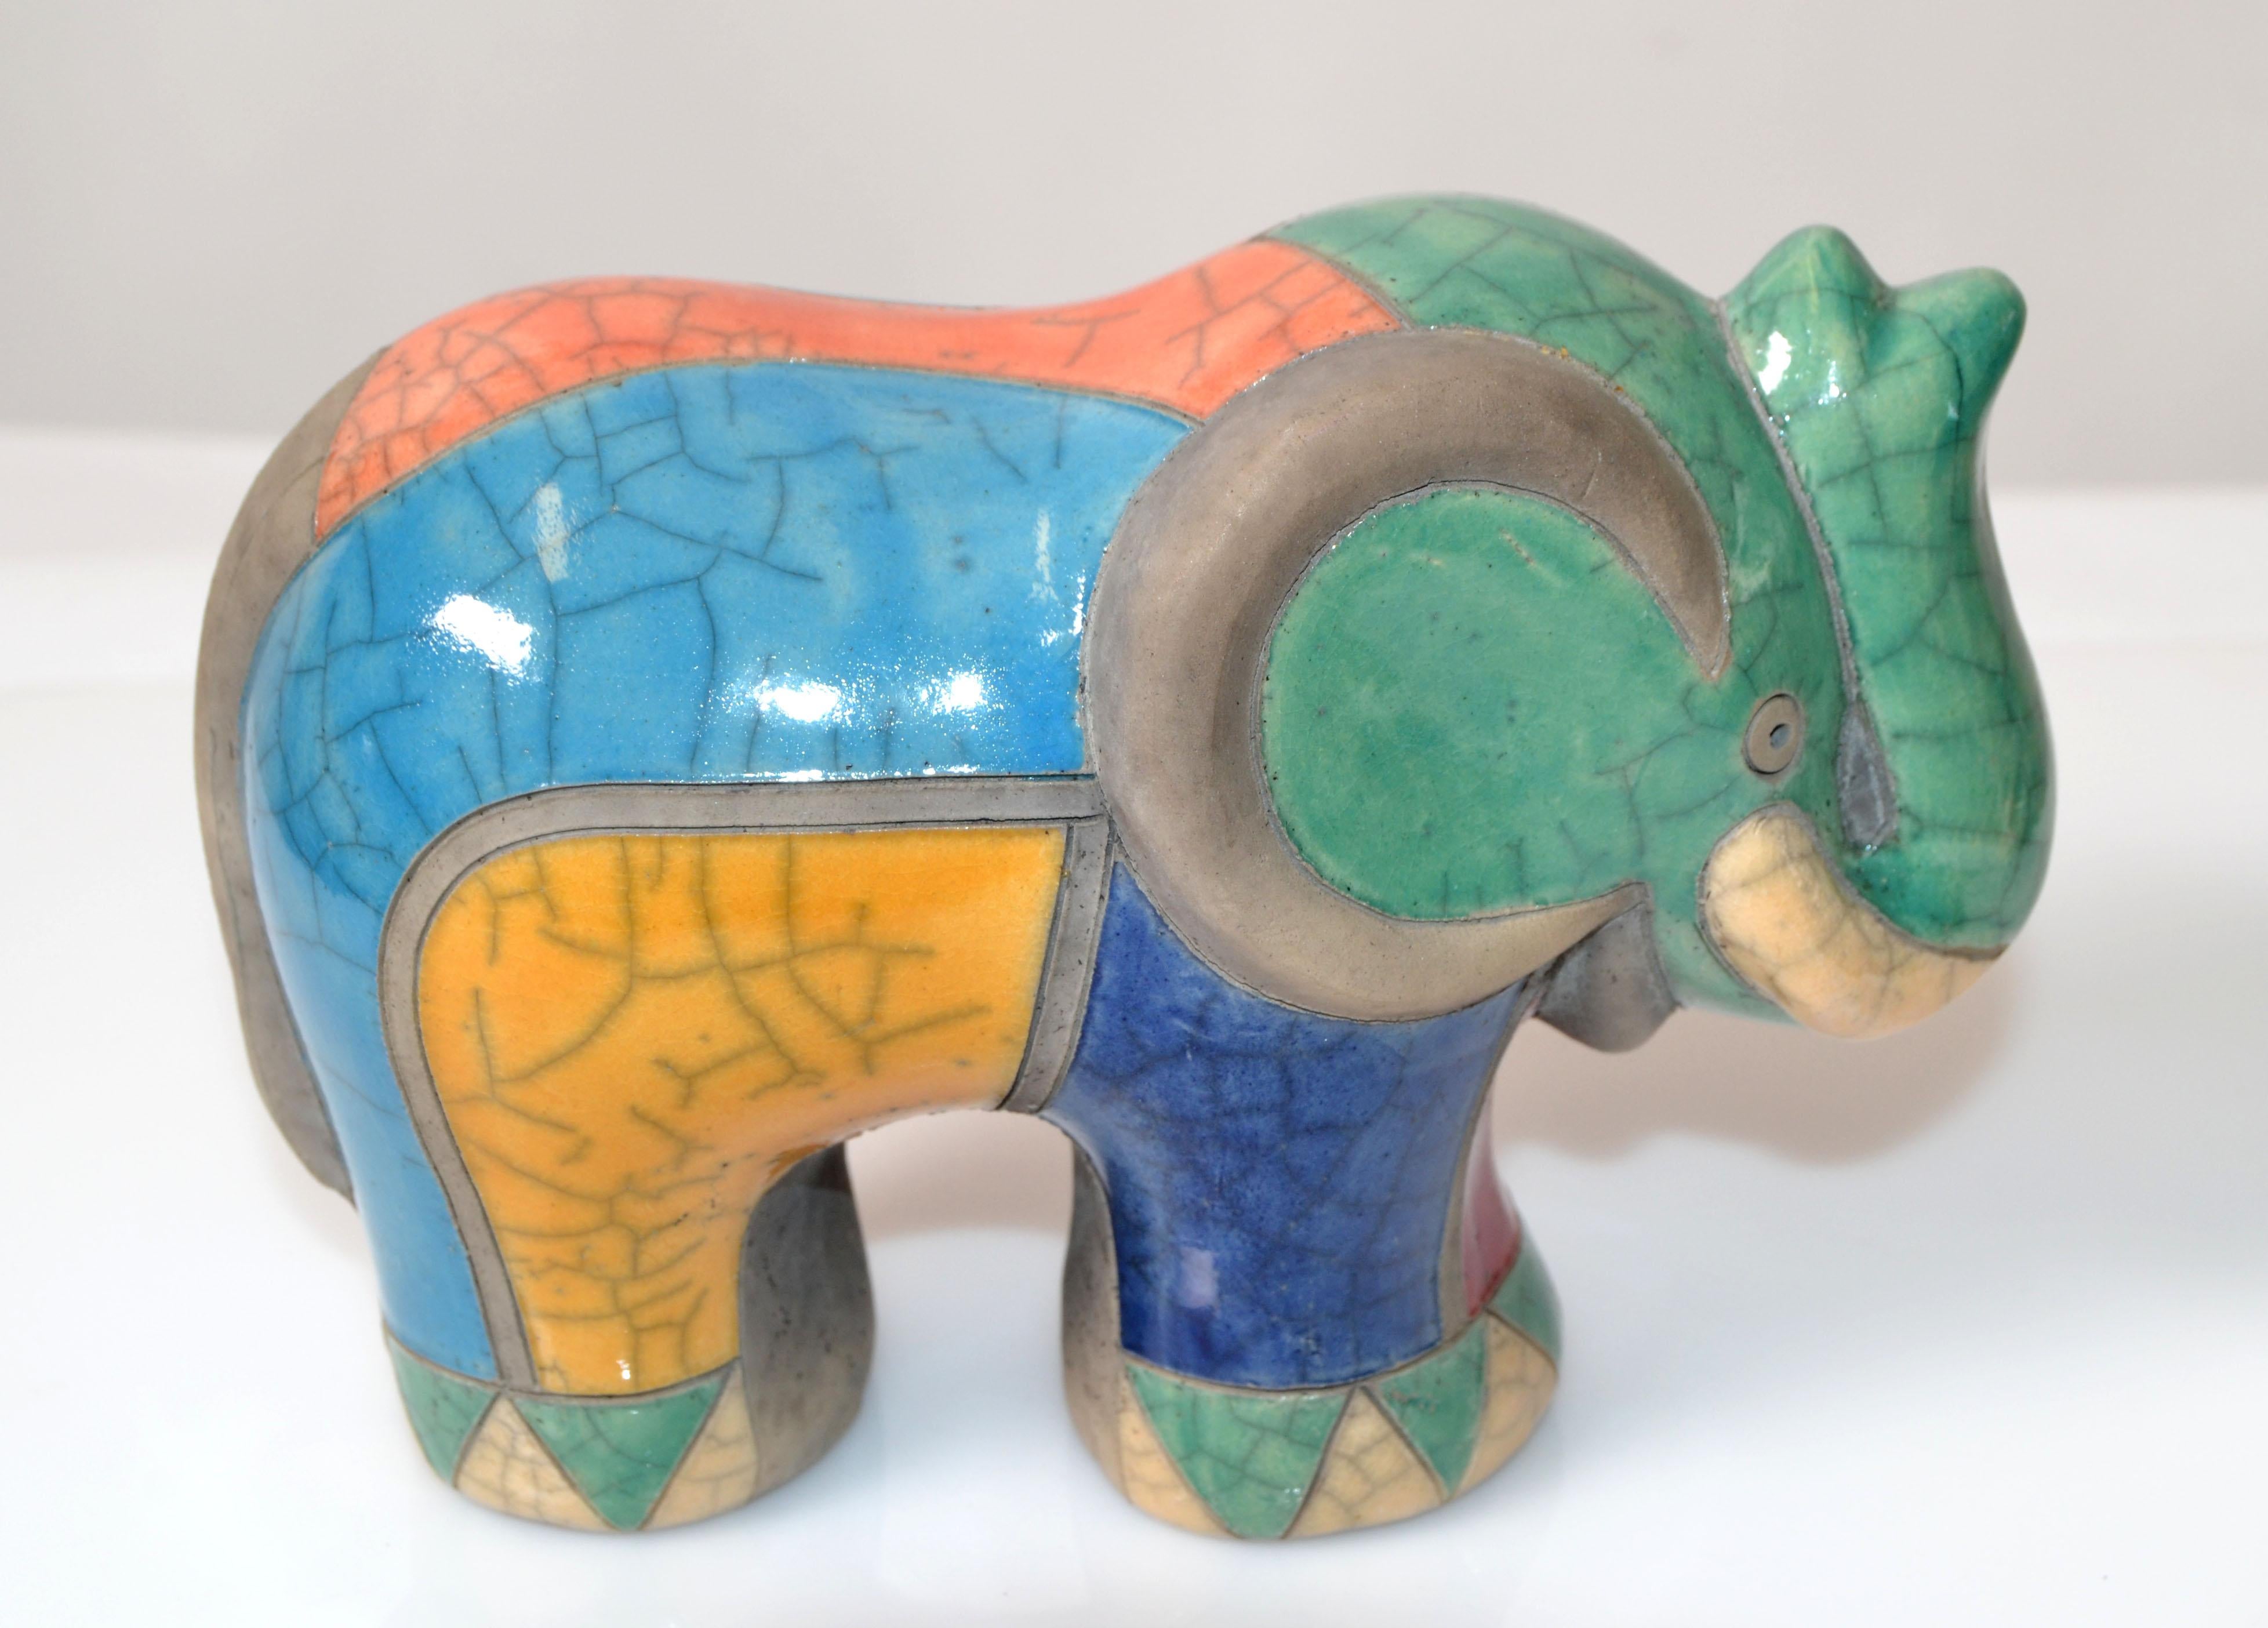 Italian Luca CL Marked Colorful Ceramic Elephant Sculpture Mid-Century Modern Italy 1970 For Sale